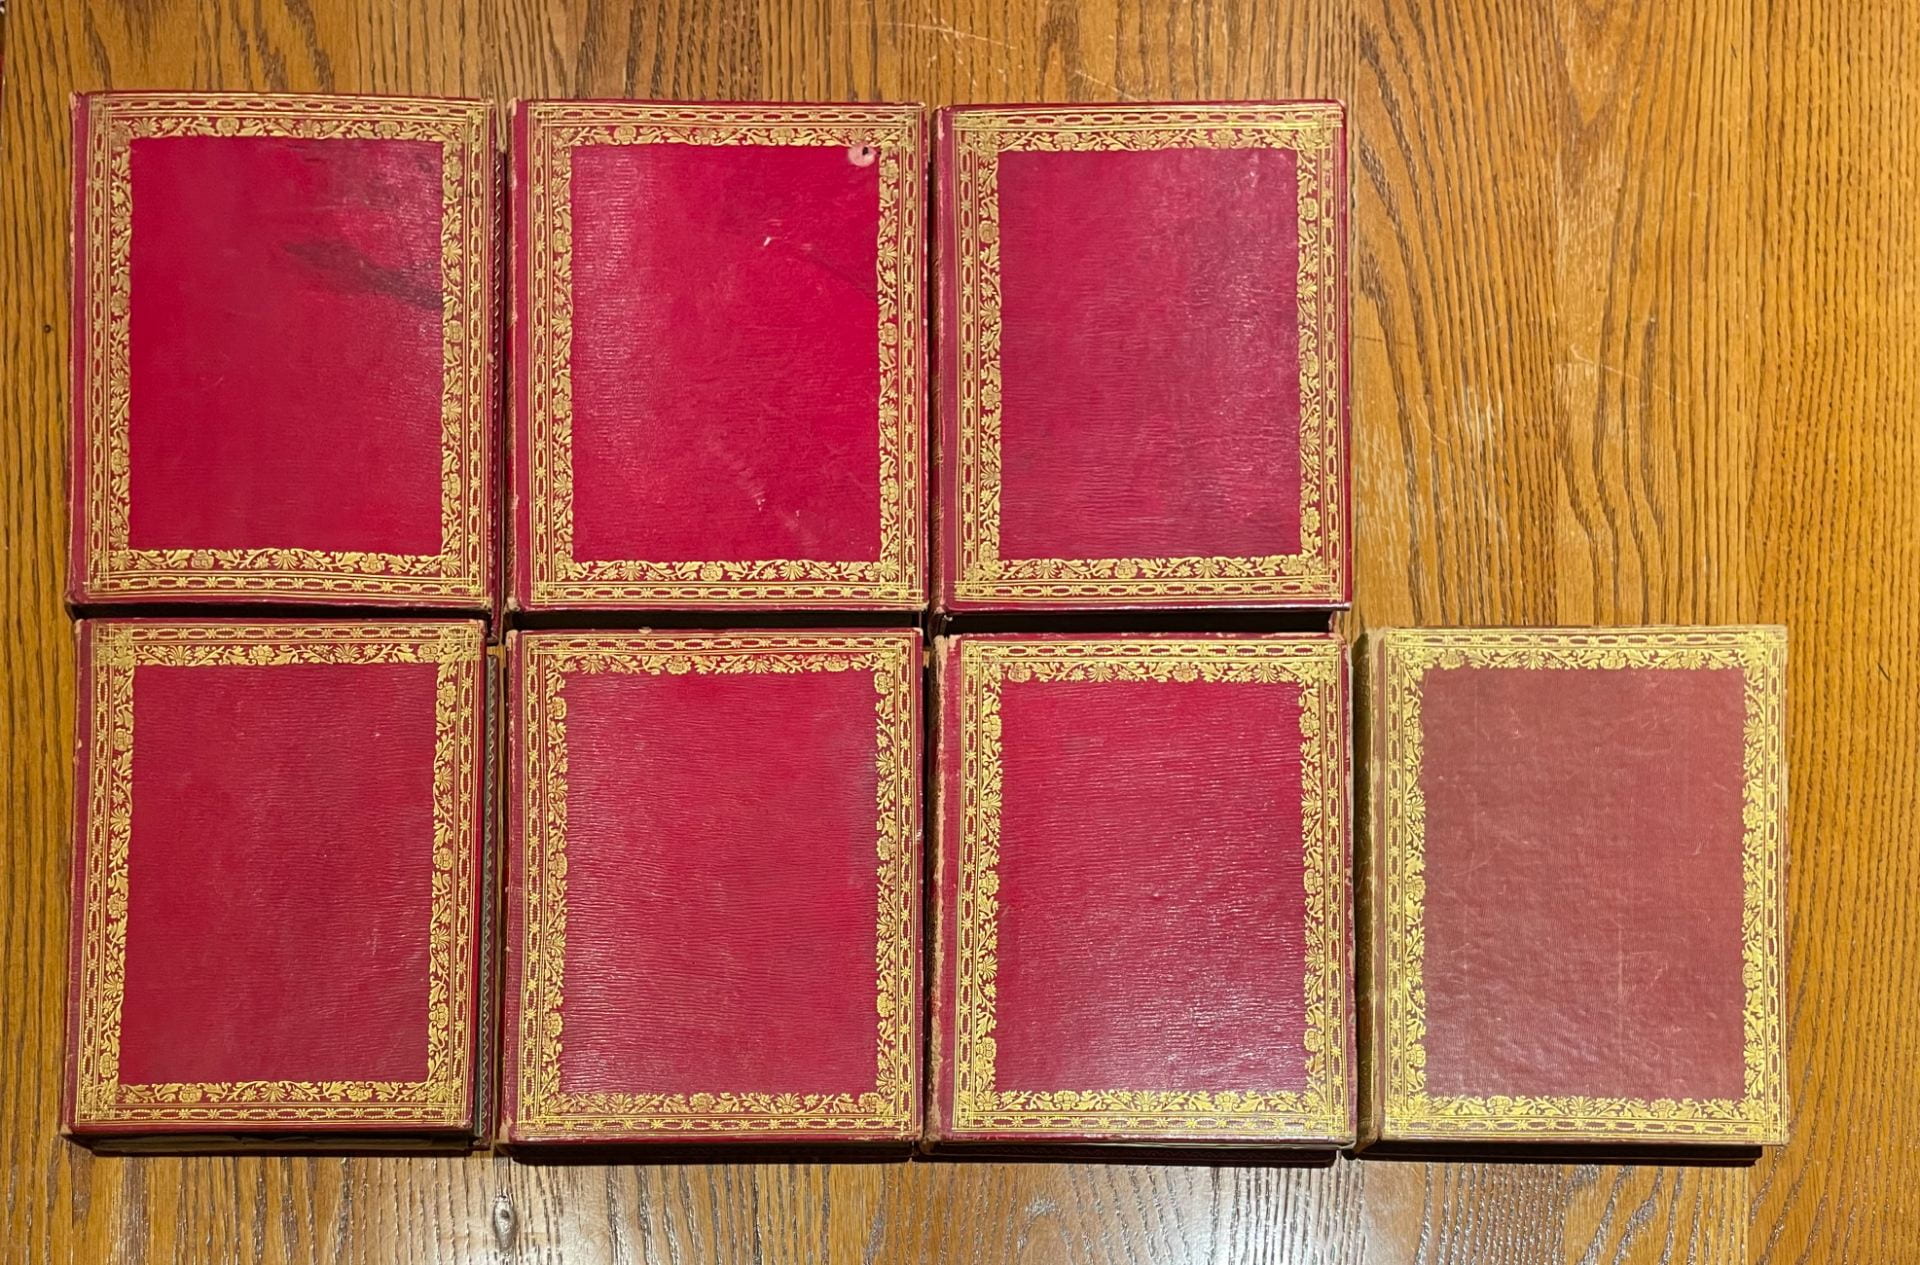 Seven red volumes with guilt edging.